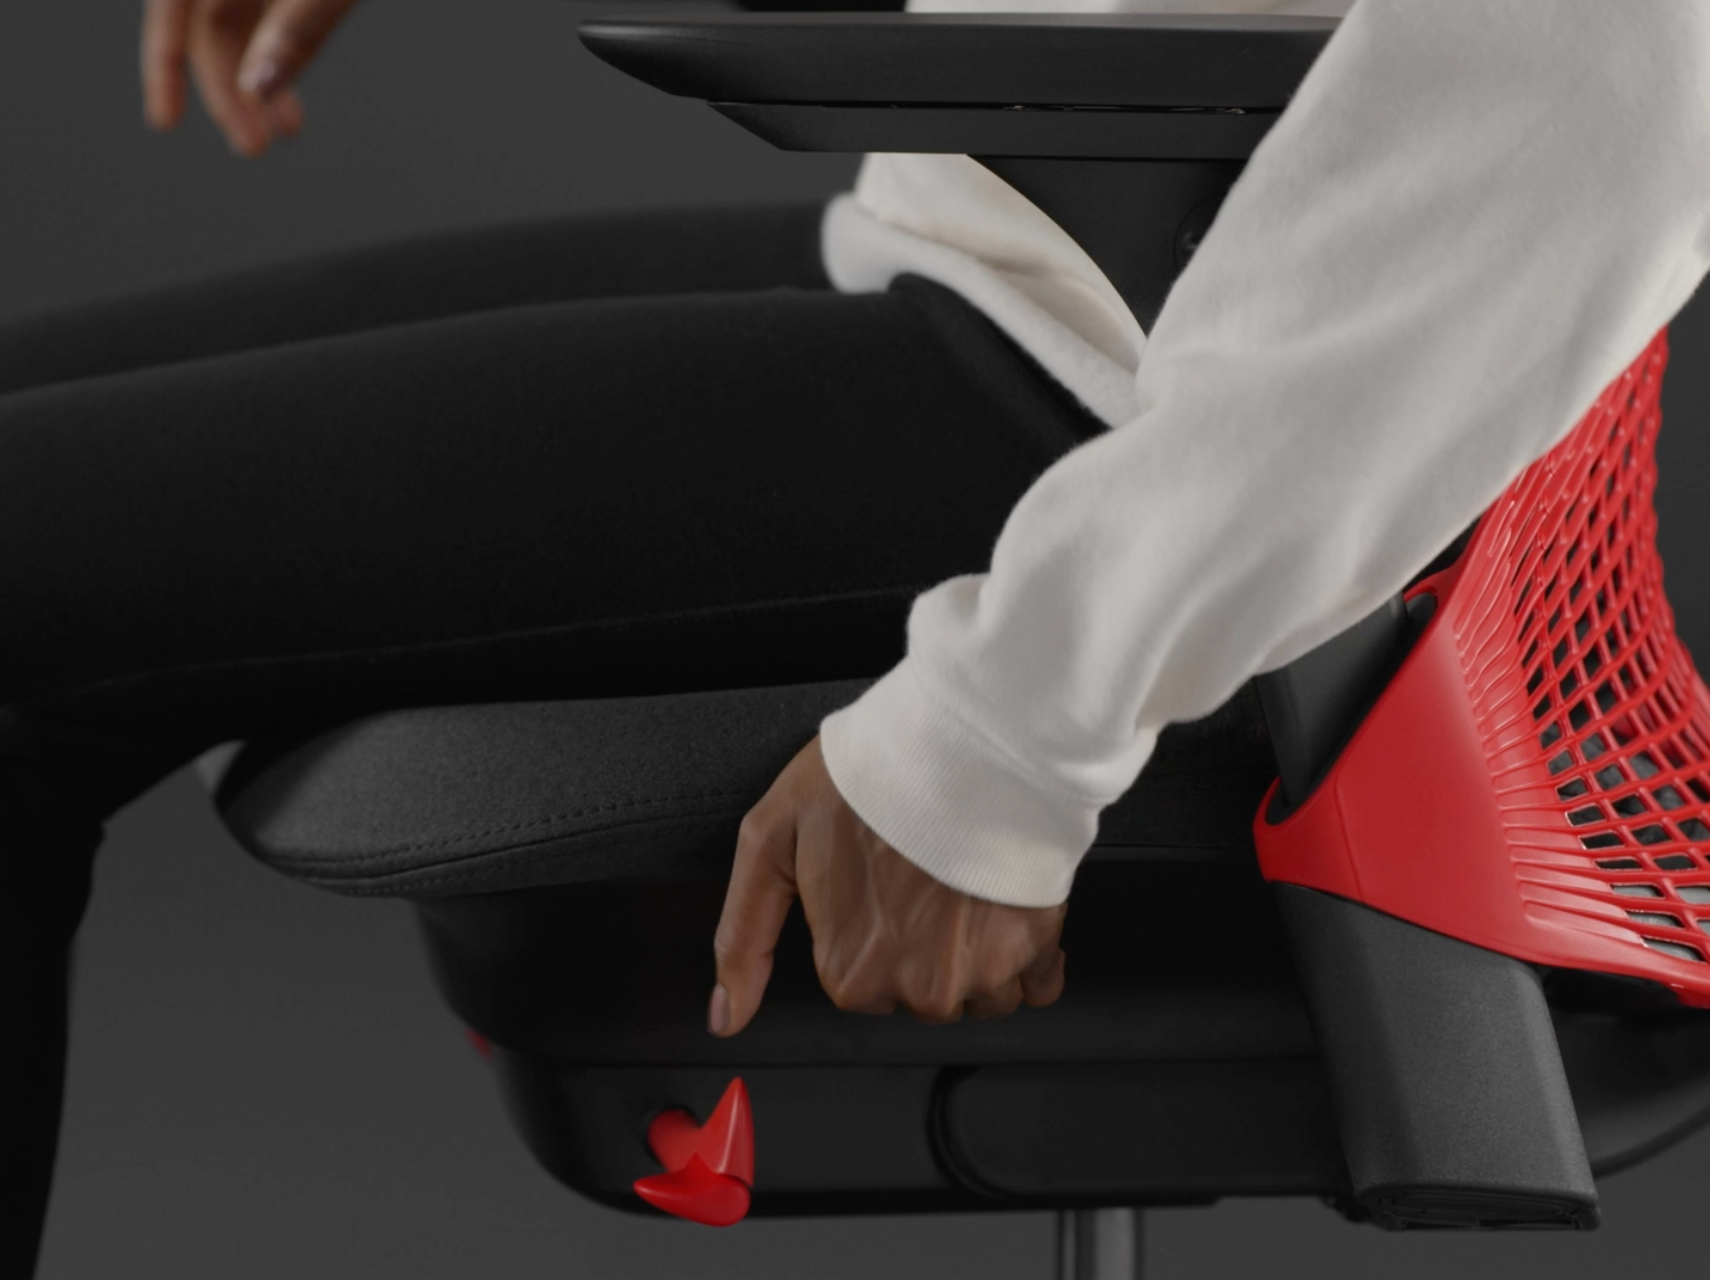 A video shows how to adjust Sayl's seat depth.